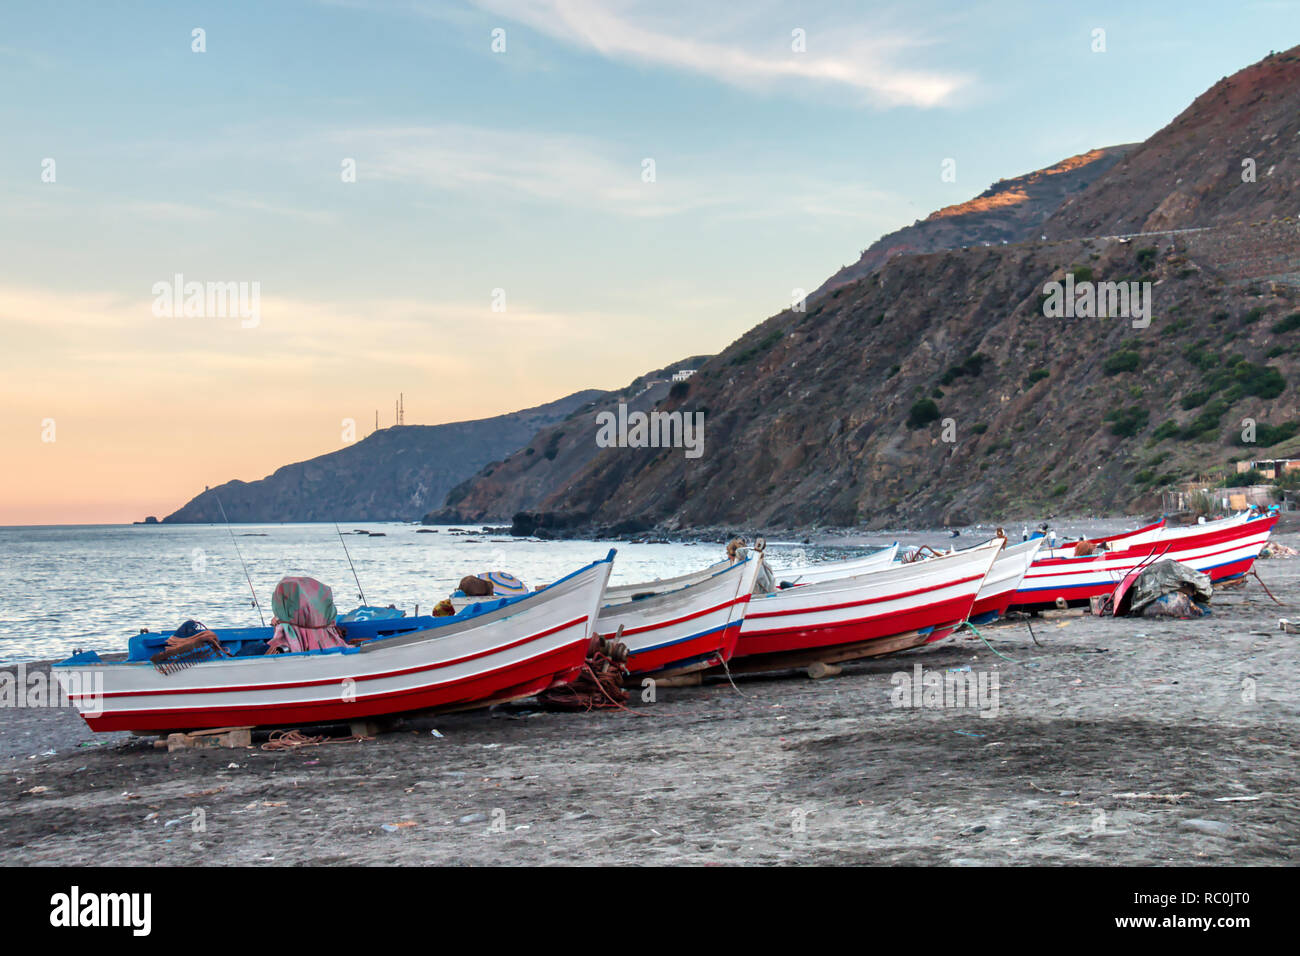 Small fishing boats on the beach of Oued Laou, a coastal town in the province of Chefchaouen, Morocco Stock Photo